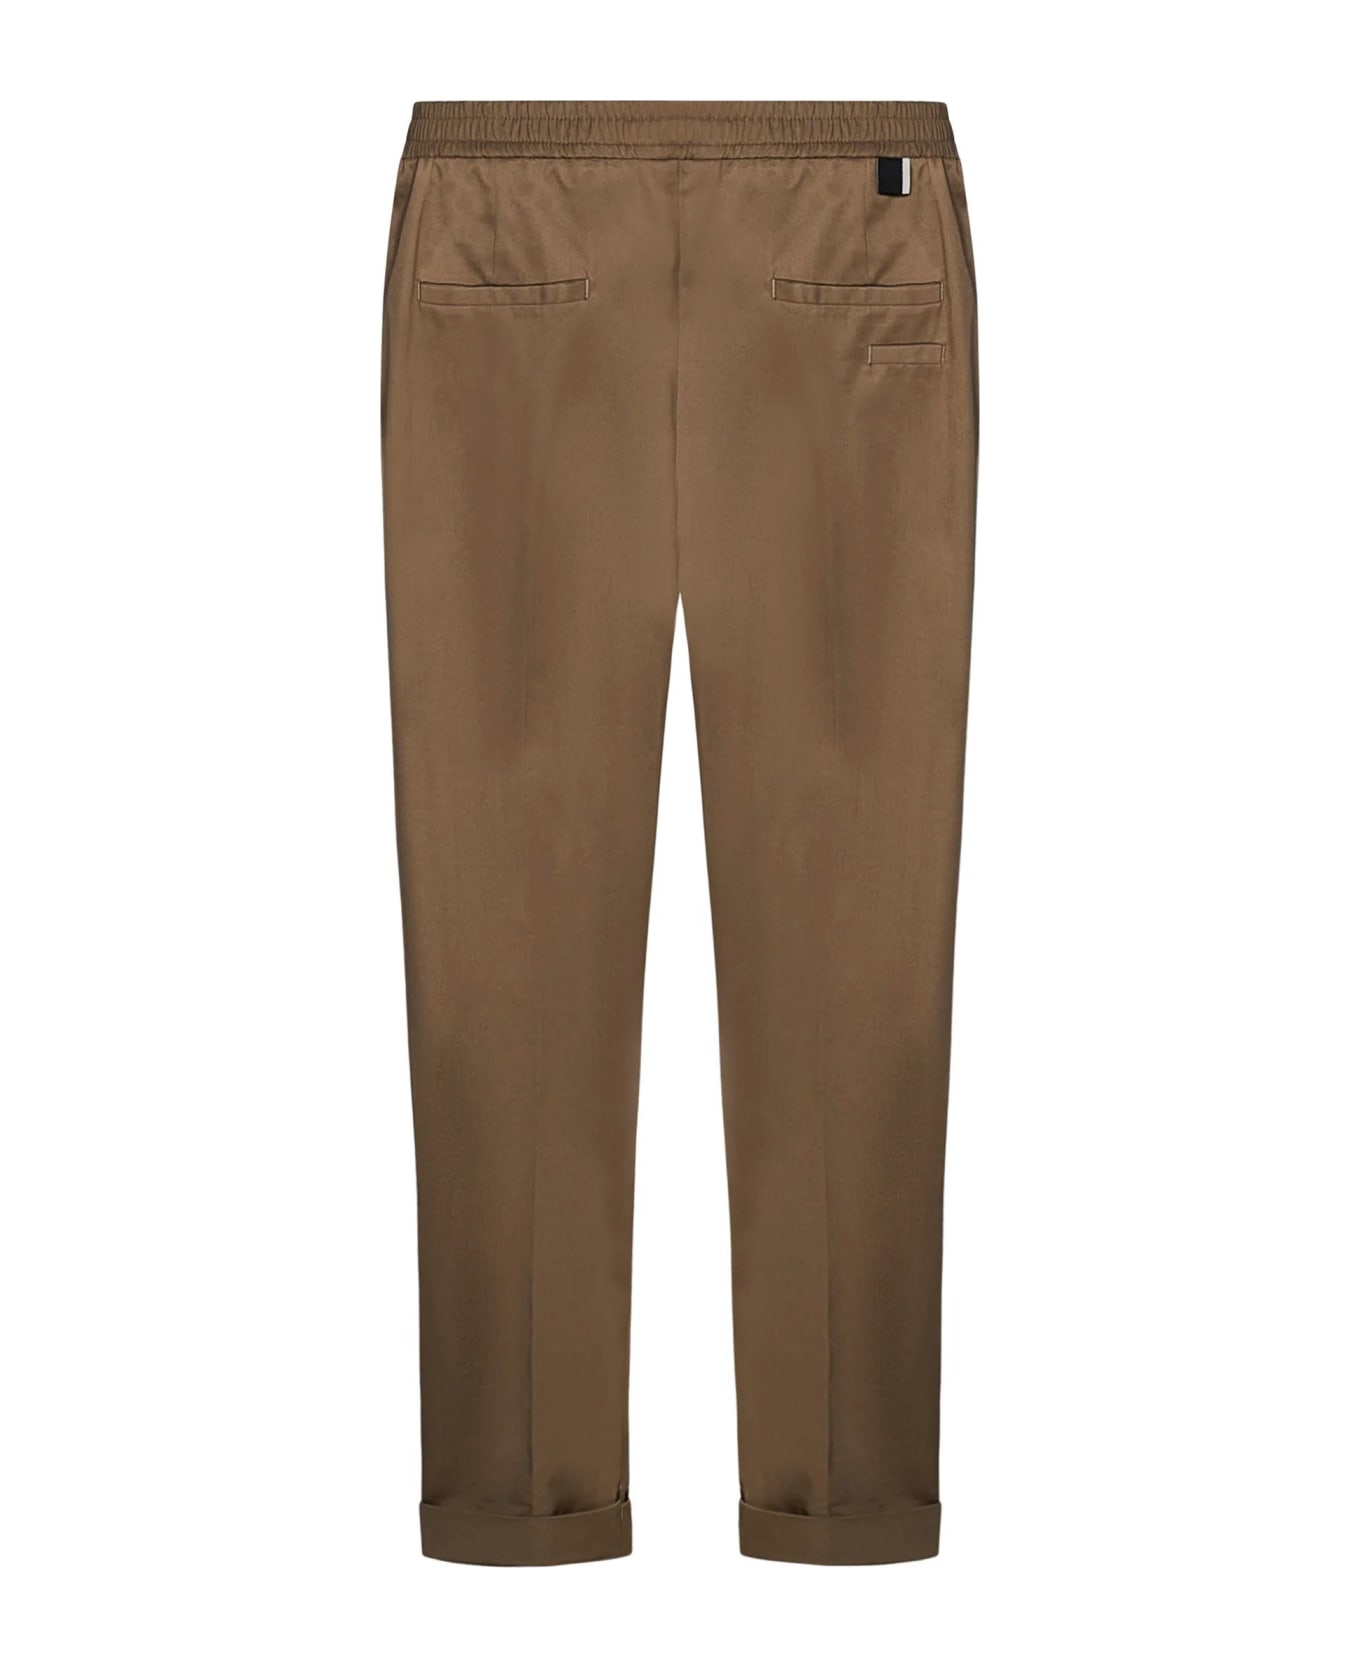 Low Brand Trousers Brown - Brown